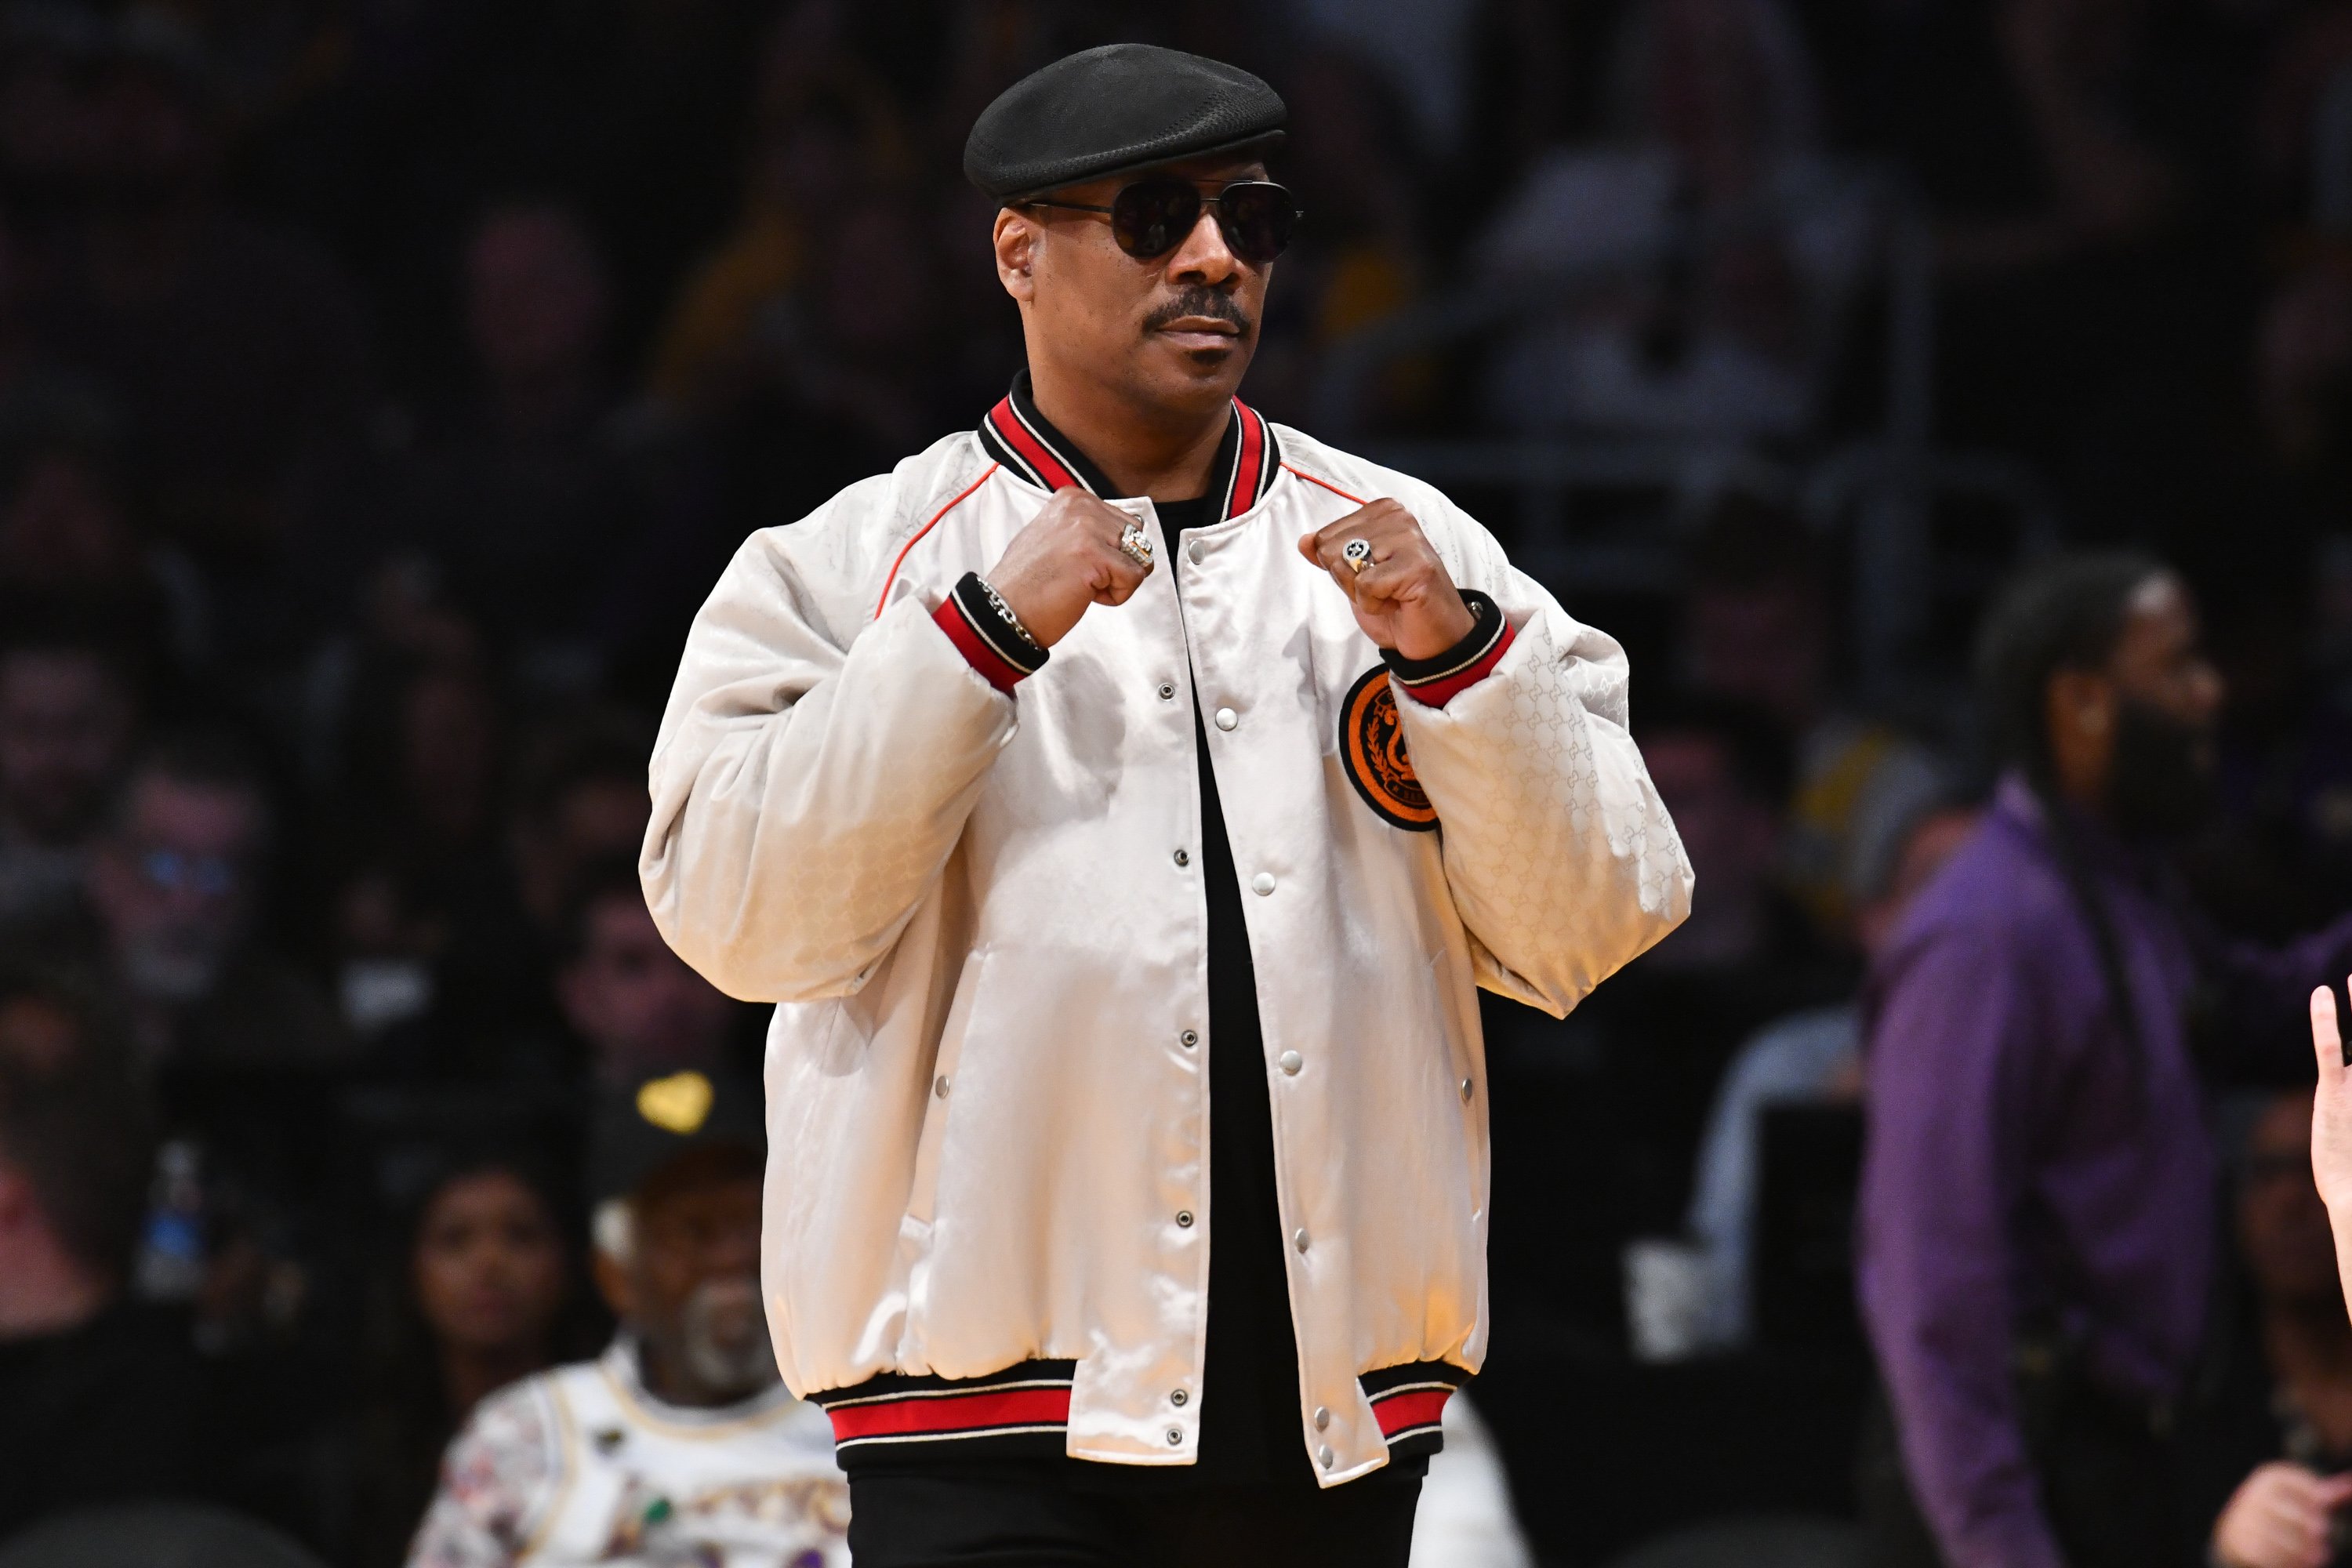 Eddie Murphy raises his fists at a LA Lakers game